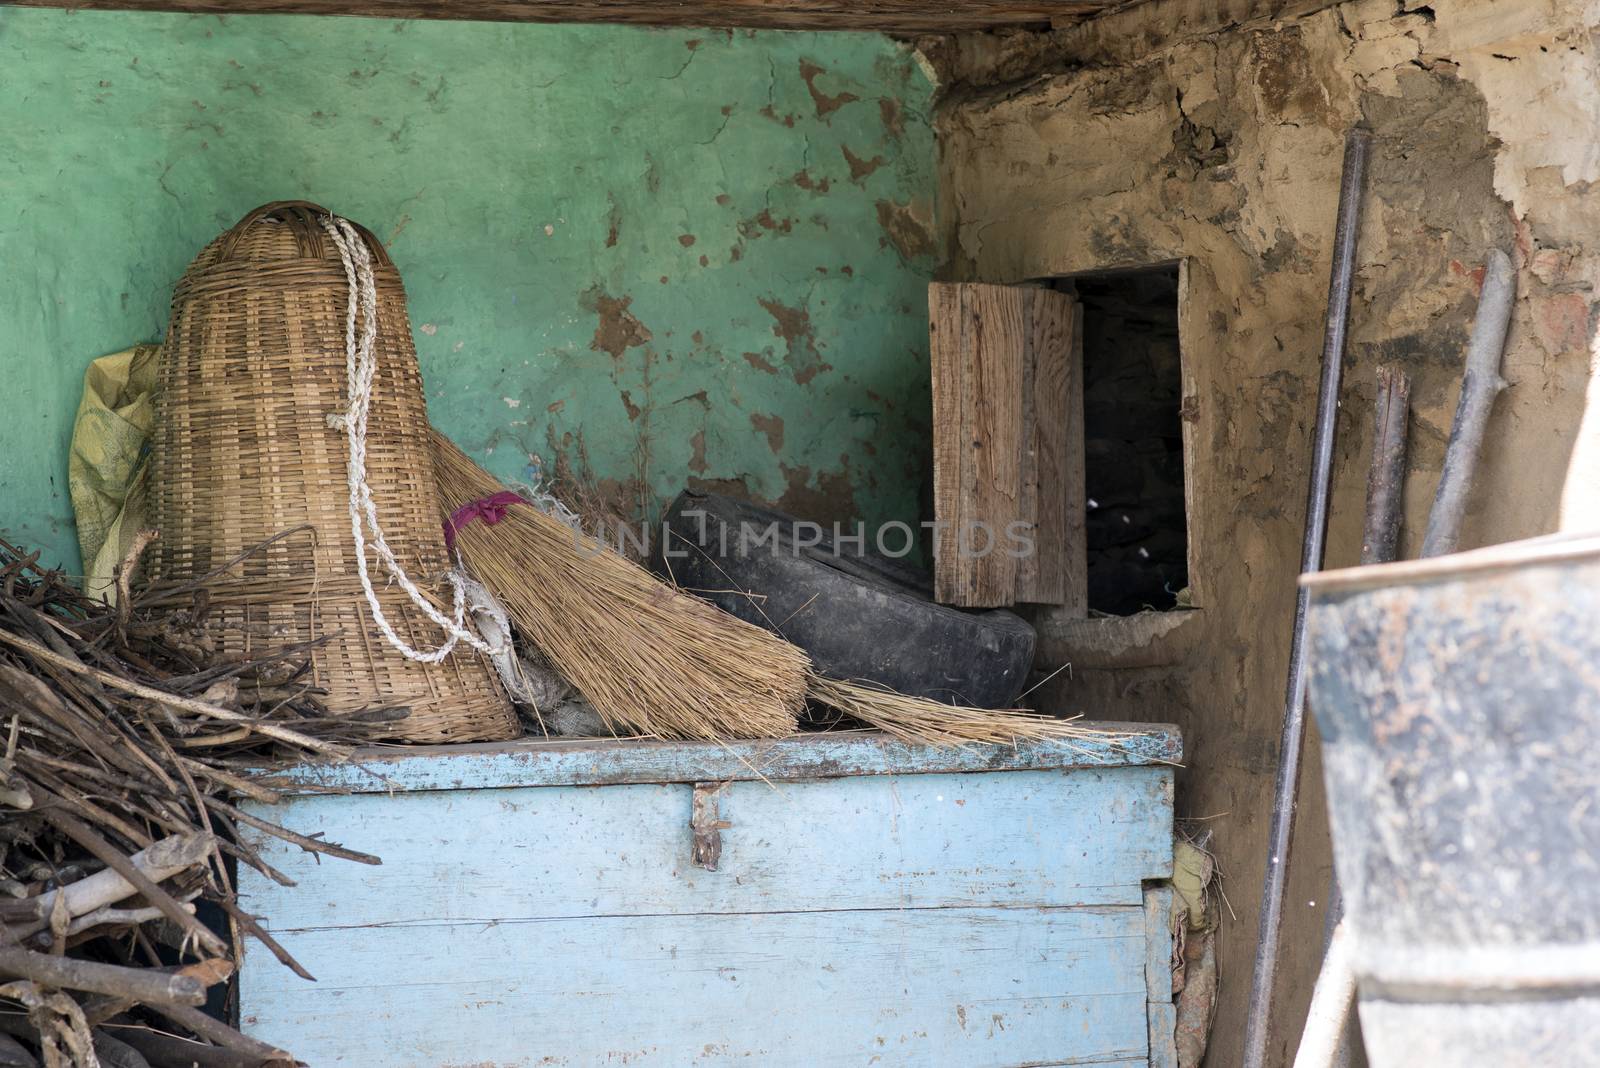 Ground floor of a traditional house used for storing items, fire wood stick etc. in a rural village of Himachal Pradesh, India.